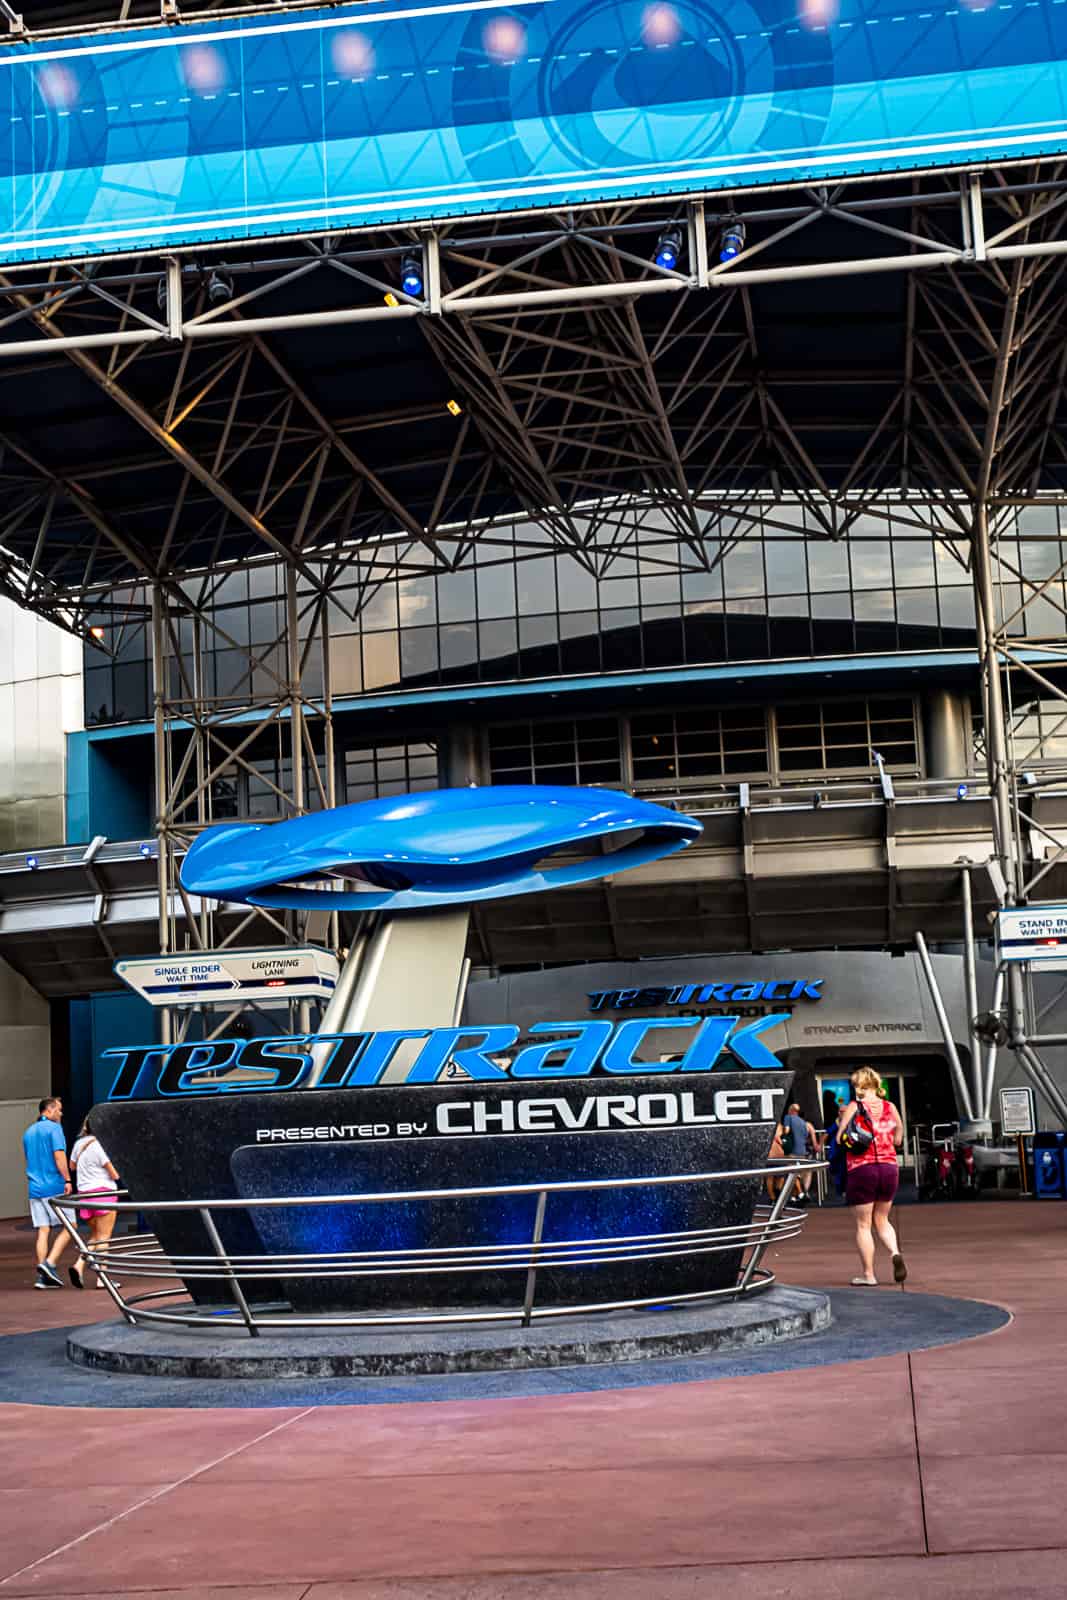 Outside Chevrolet Test Track Epcot speed ride at Disney World